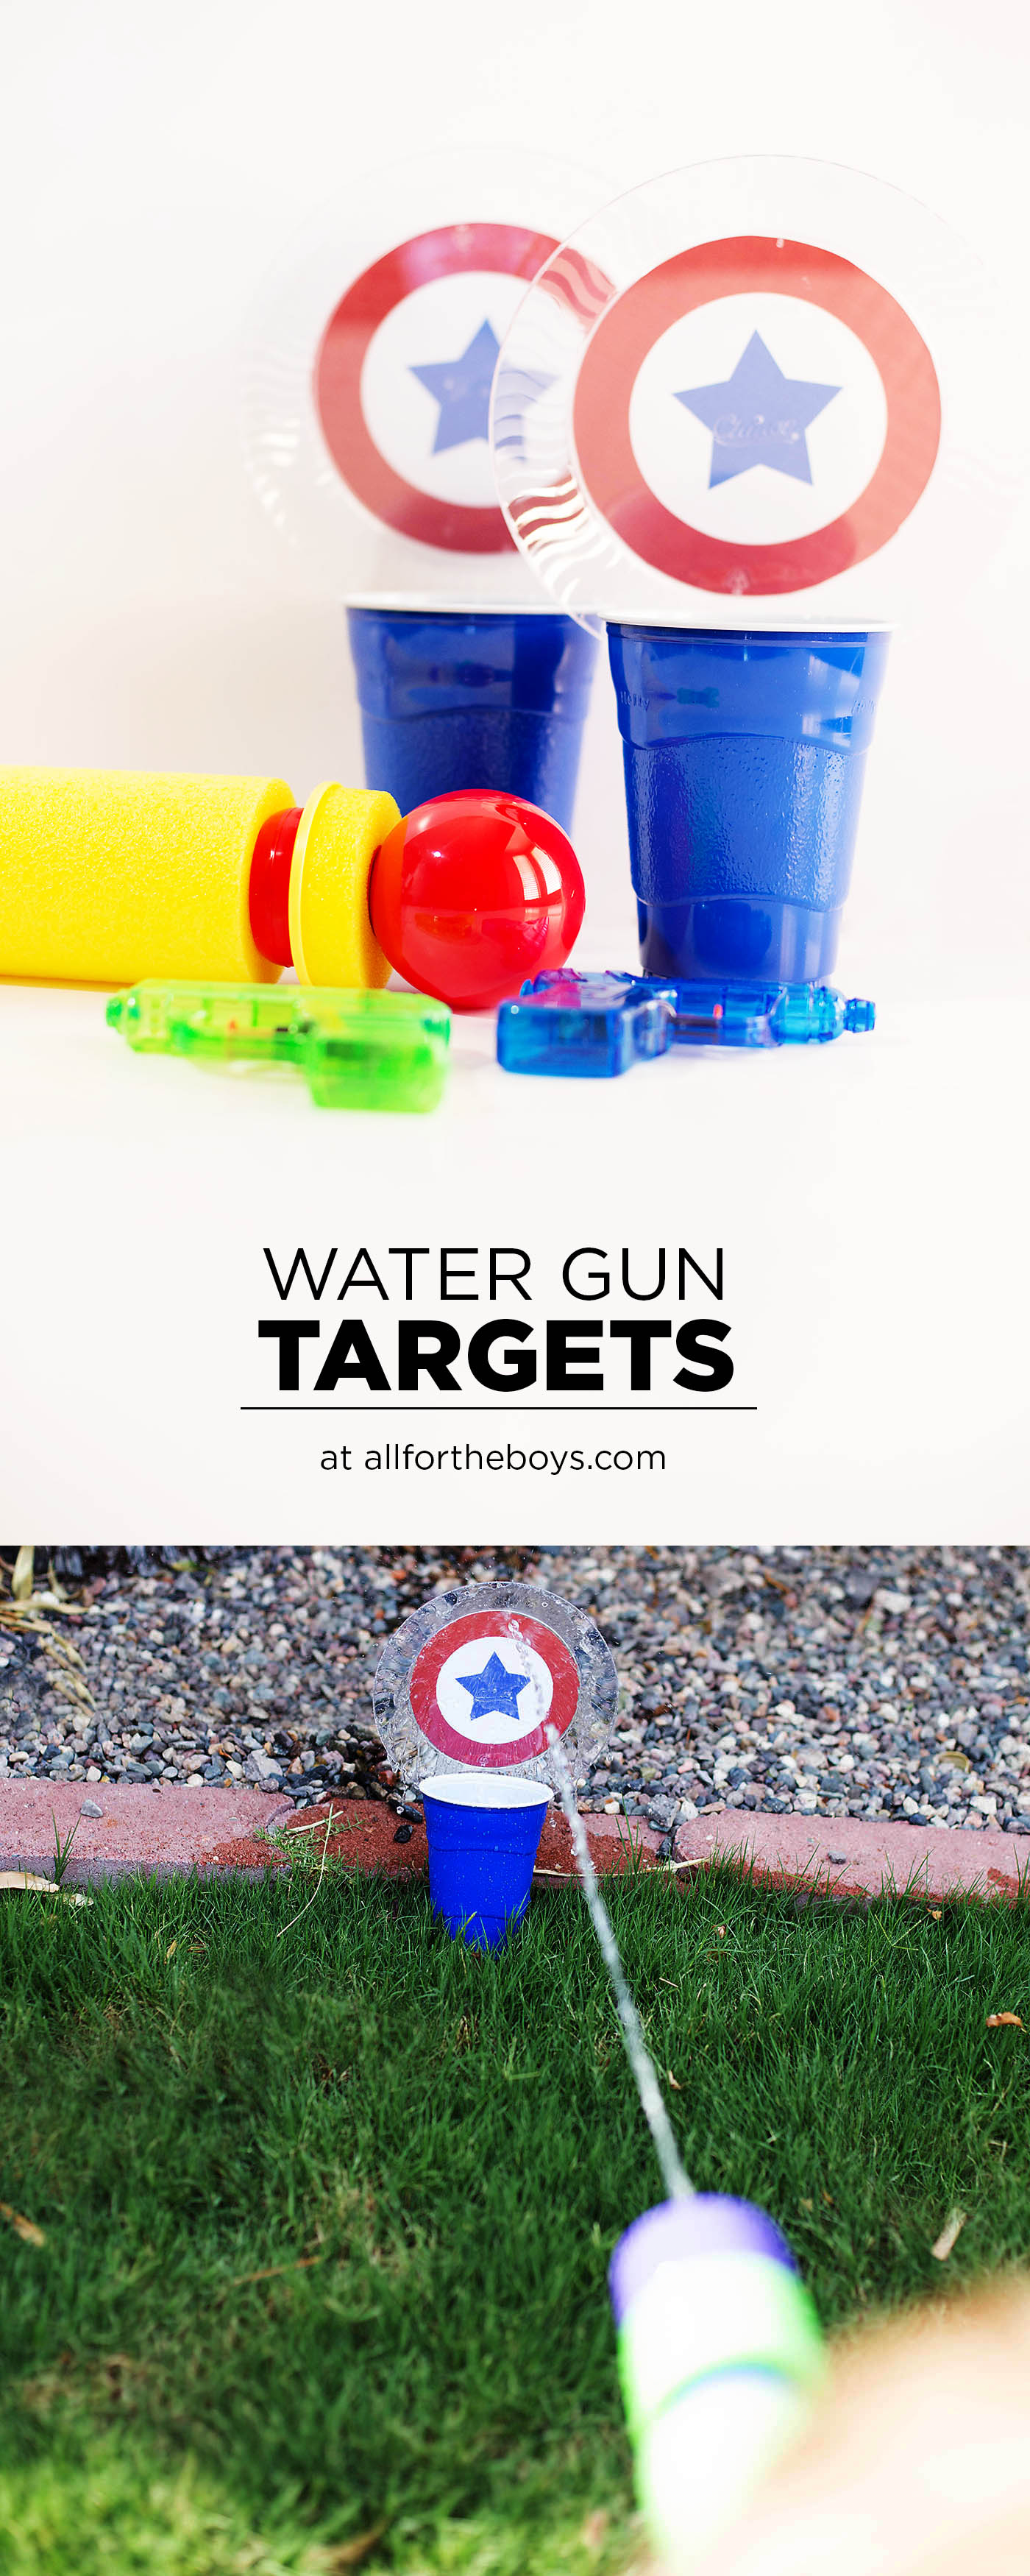 Water gun targets - a fun summer game or activity to do with water squirters!